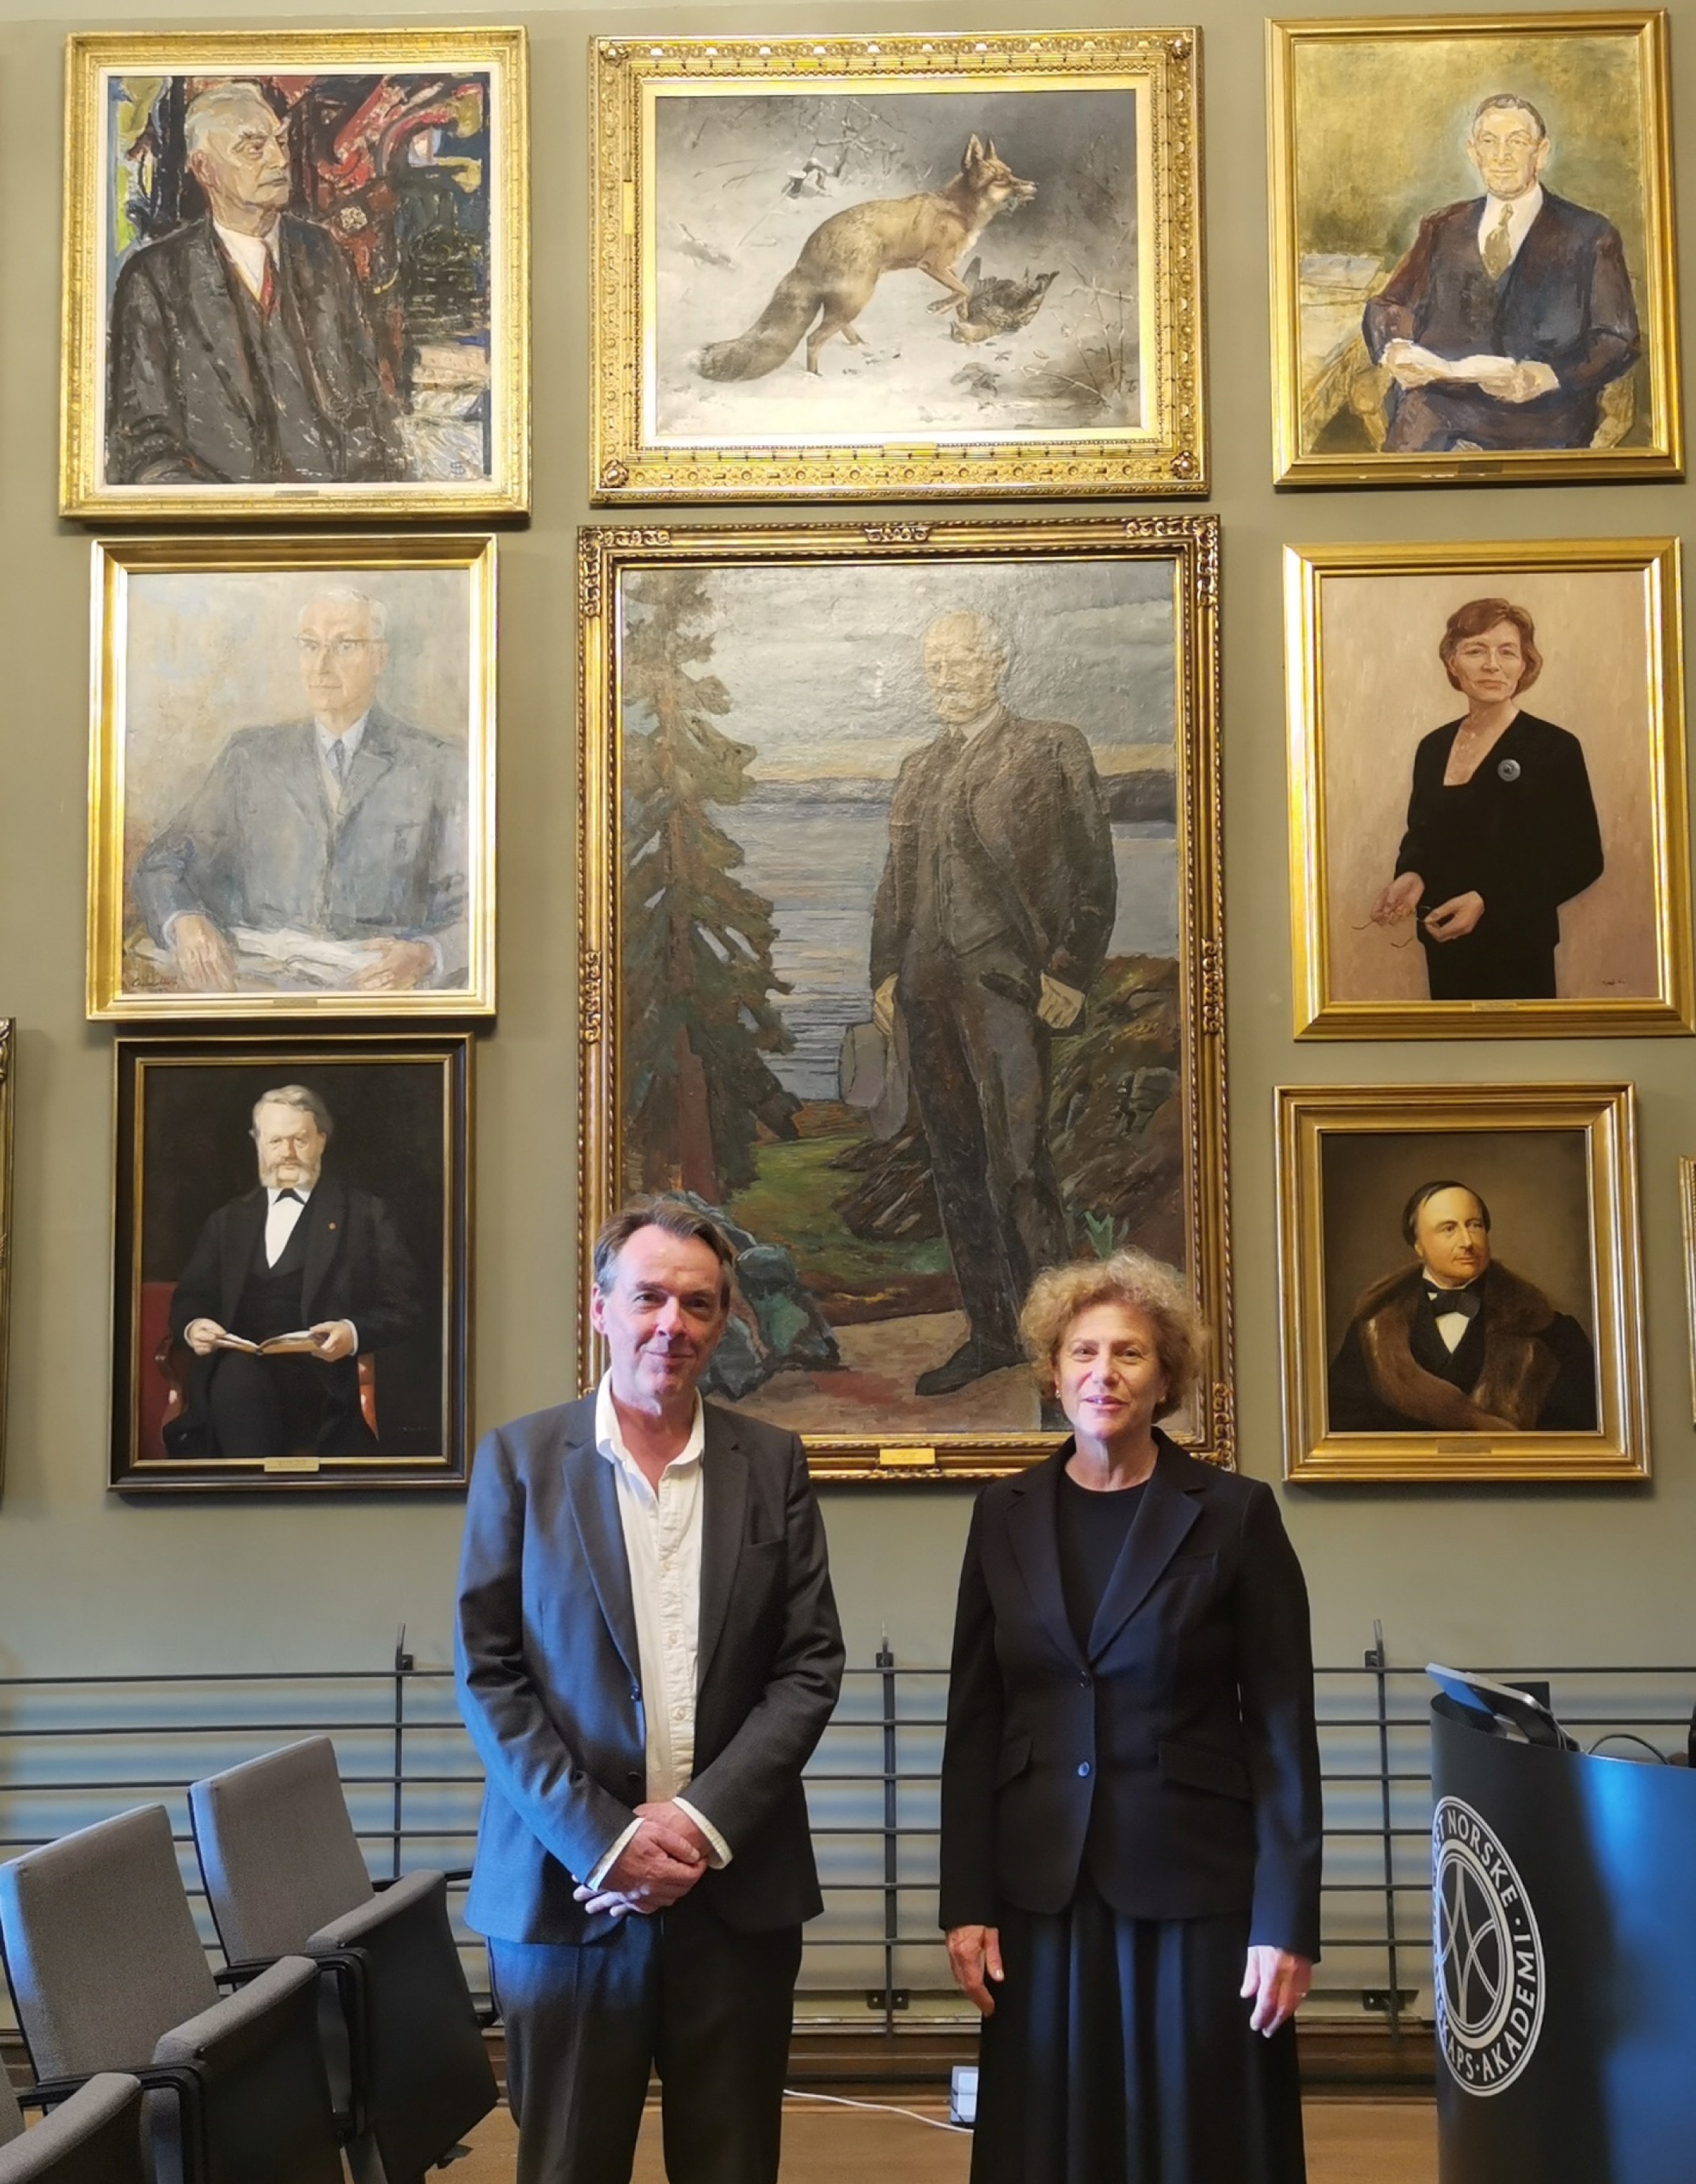 The 2022 Nansen Neuroscience Lecturers David Gems (left) and Henriette van Praag (right). The speakers are standing in front of the portrait of Fridtjof Nansen in the Kavli Lecture Hall, in the building of the Norwegian Academy of Science and Letters, Oslo, Norway. Photo by Evandro F. Fang.